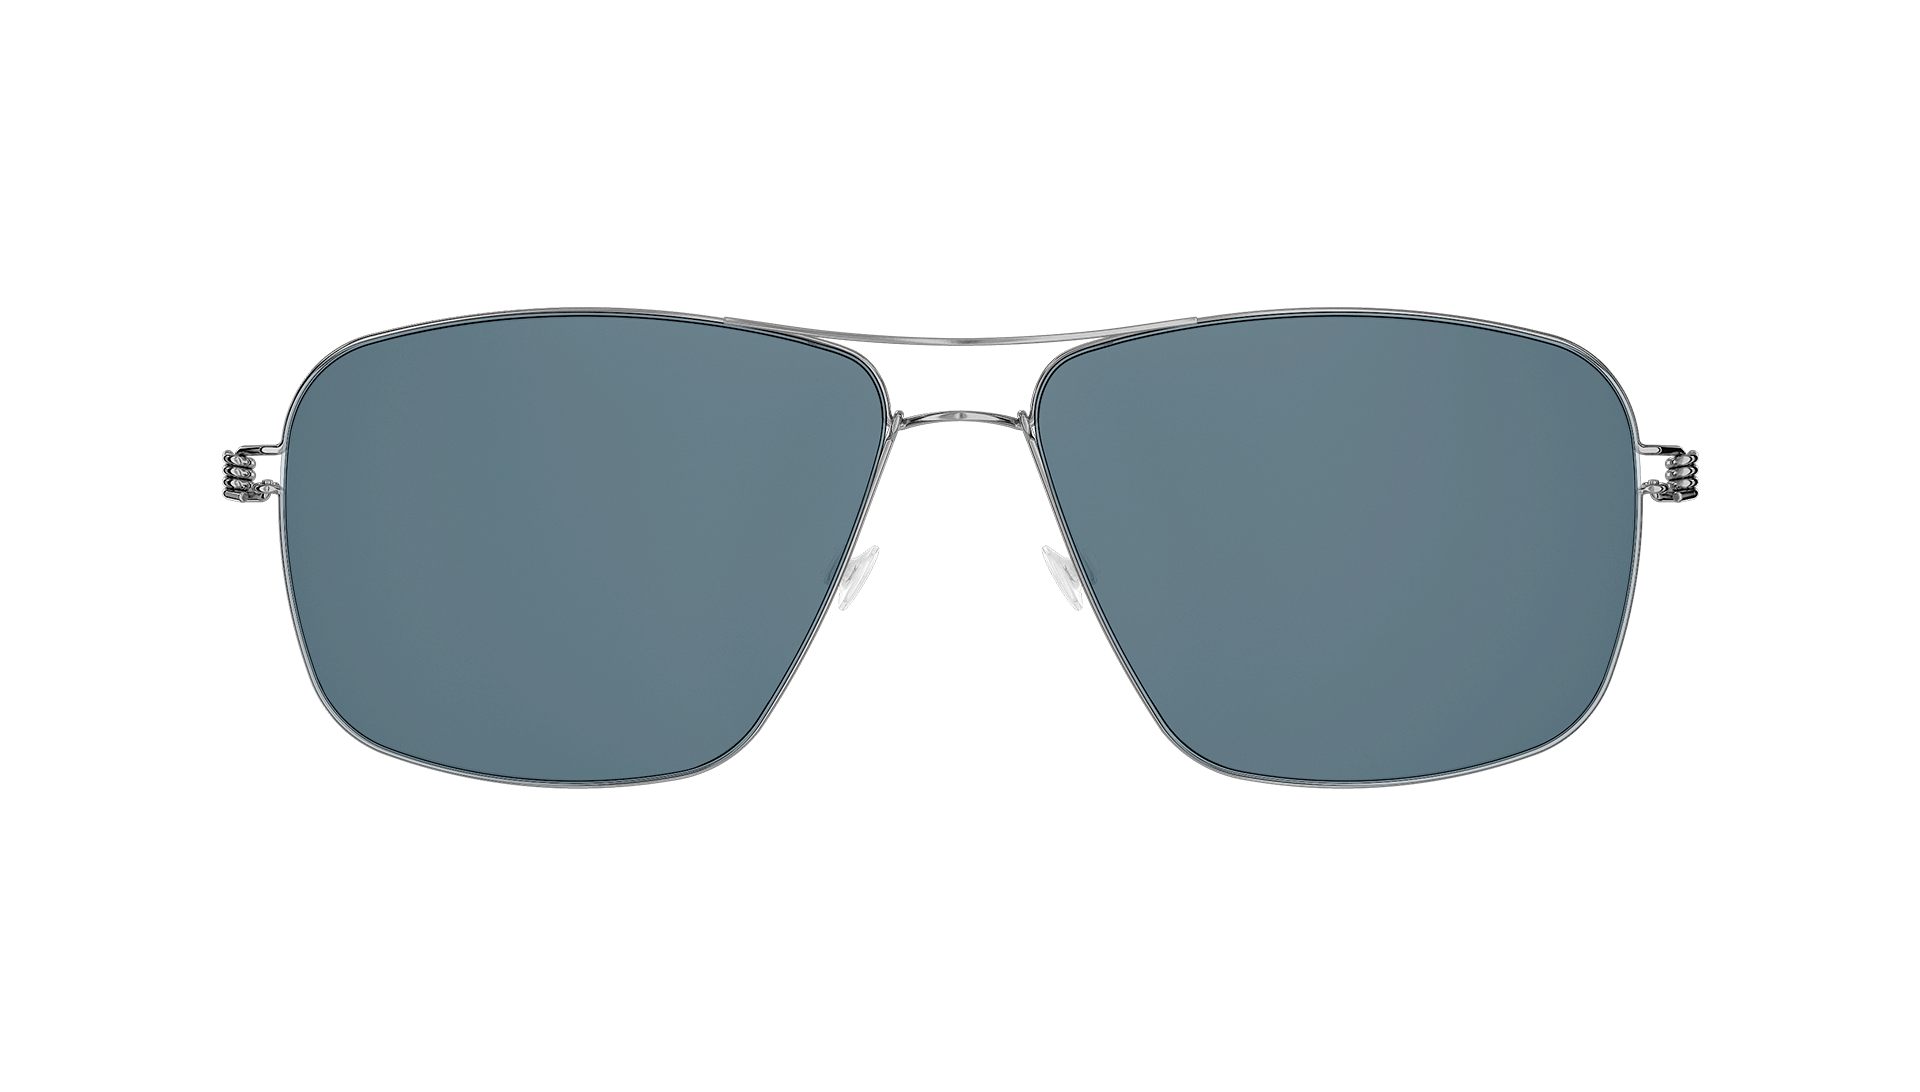 LINDBERG Model 8208 rounded square shape sunglasses in silver titanium with blue grey tinted lenses